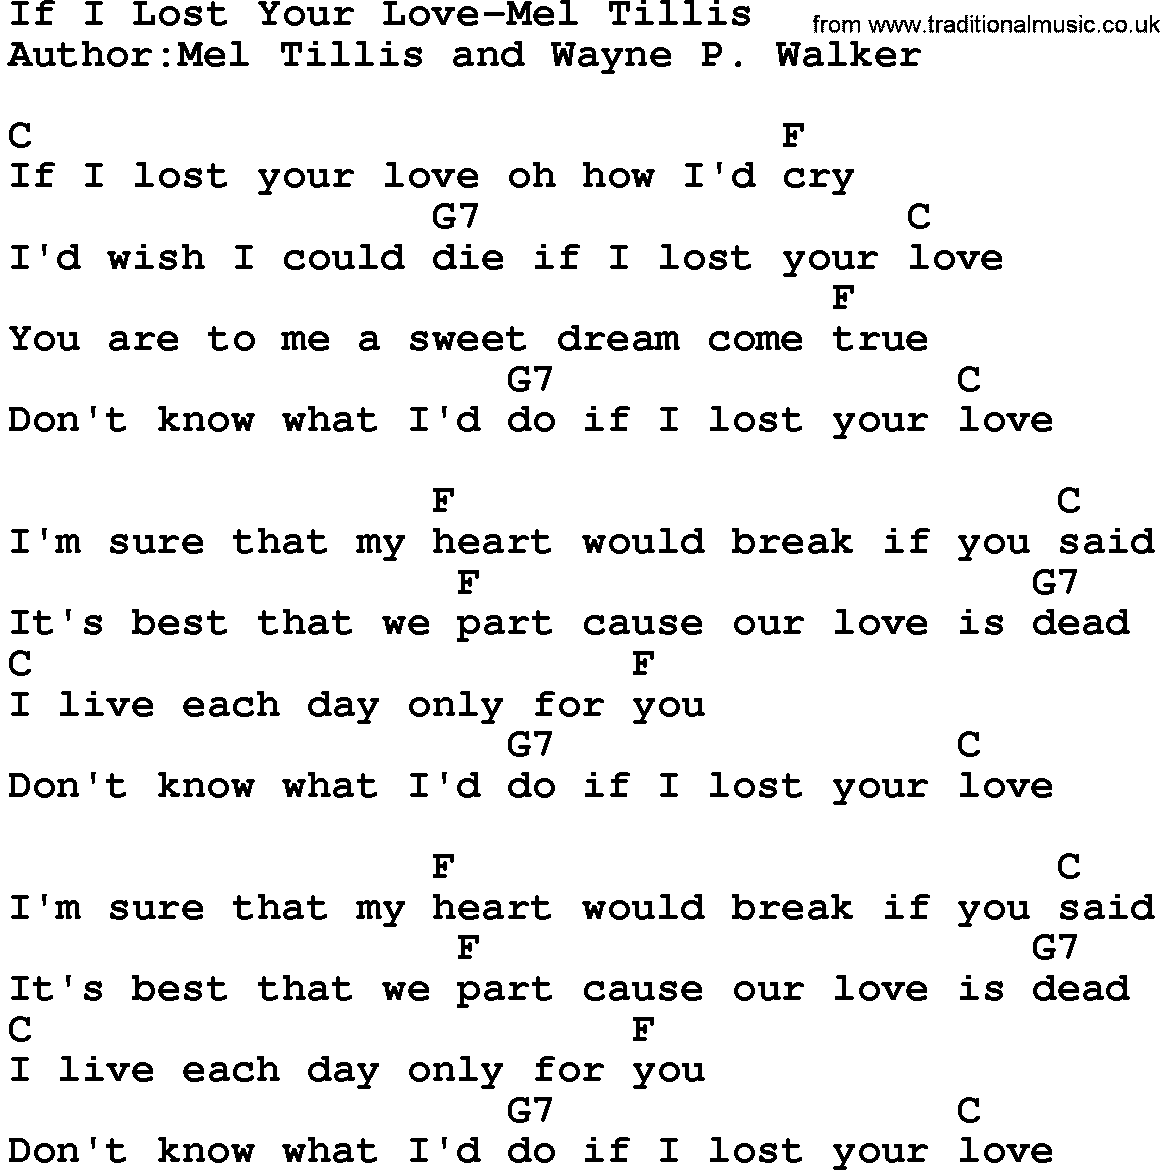 Country music song: If I Lost Your Love-Mel Tillis lyrics and chords